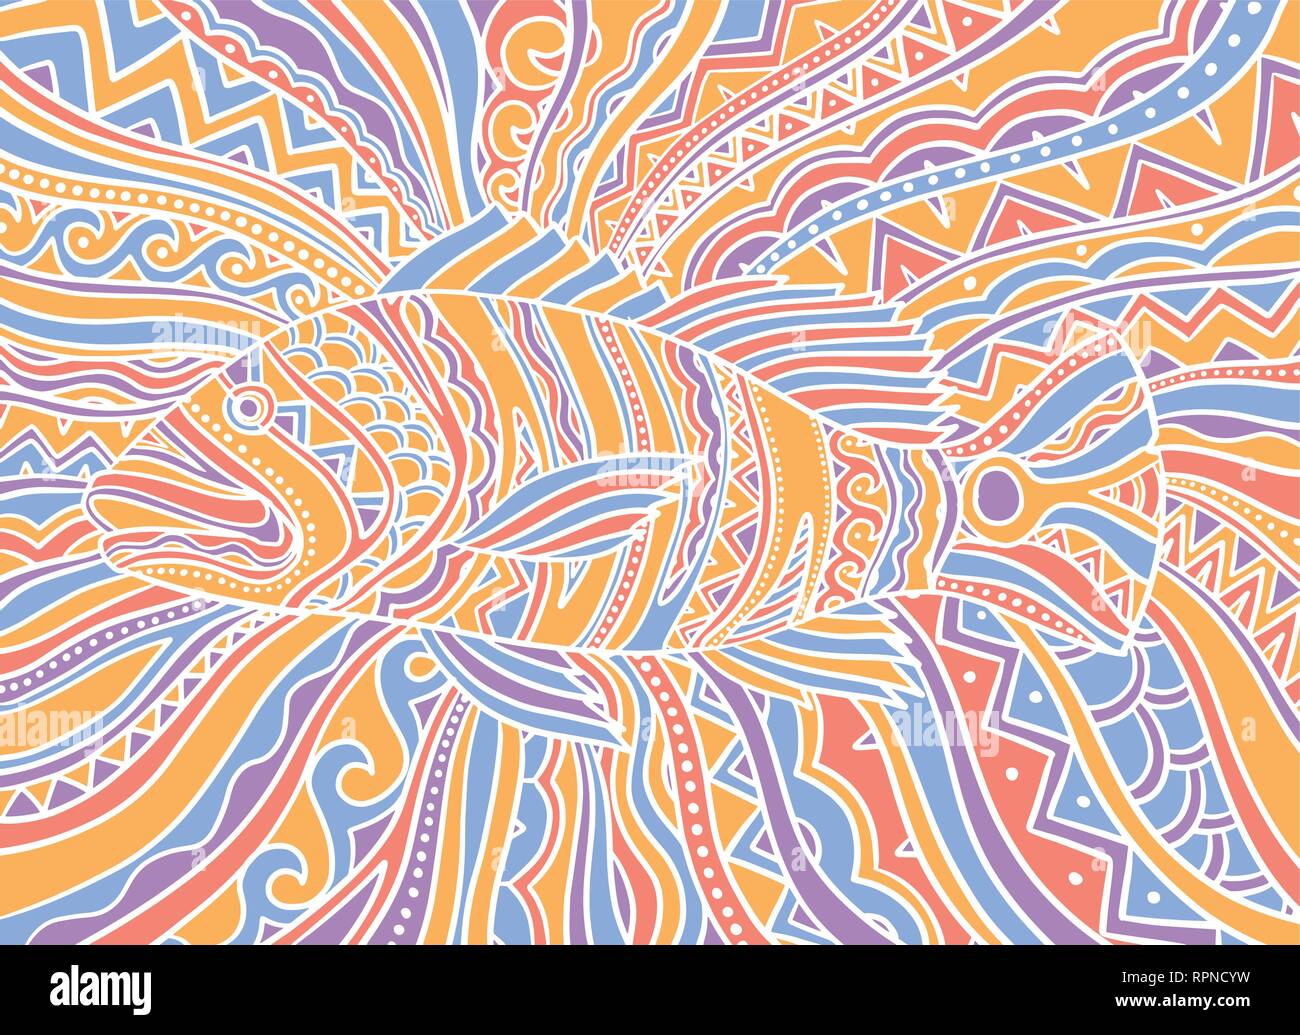 Abstract psychedelic peacock bass fish. Vector illustration background Stock Vector